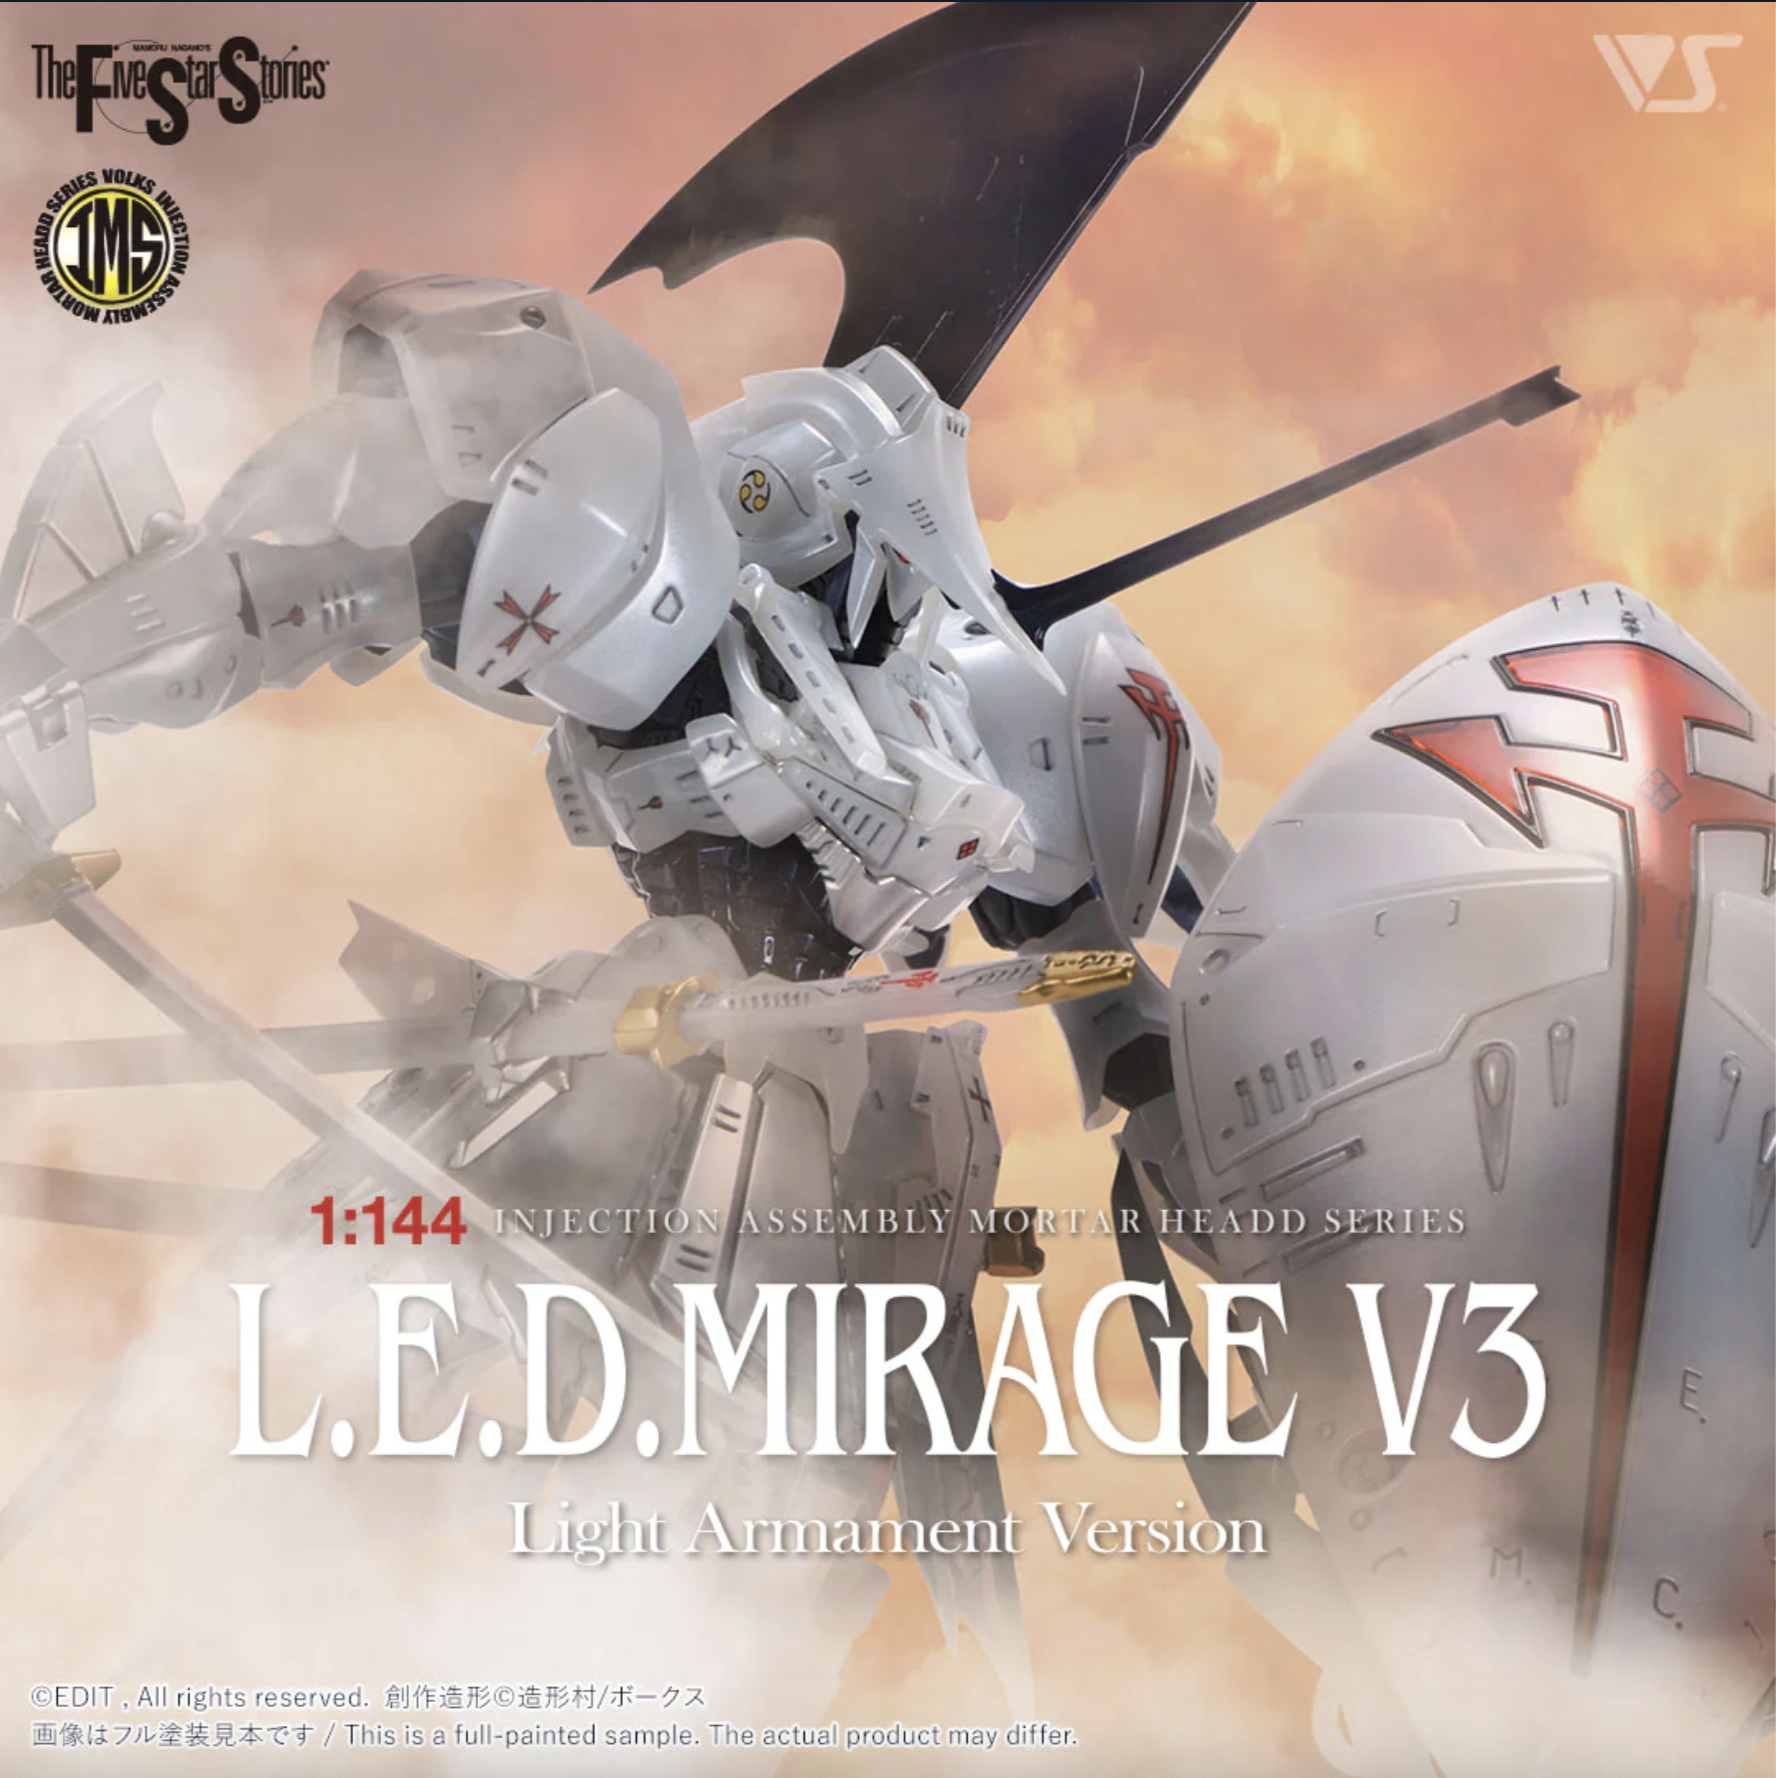 Five Star Stories Injection Assembly Mortar Head Series (IMS) 1/144 L.E.D.  MIRAGE V3 Light Armament Version - Argama Hobby - Canada